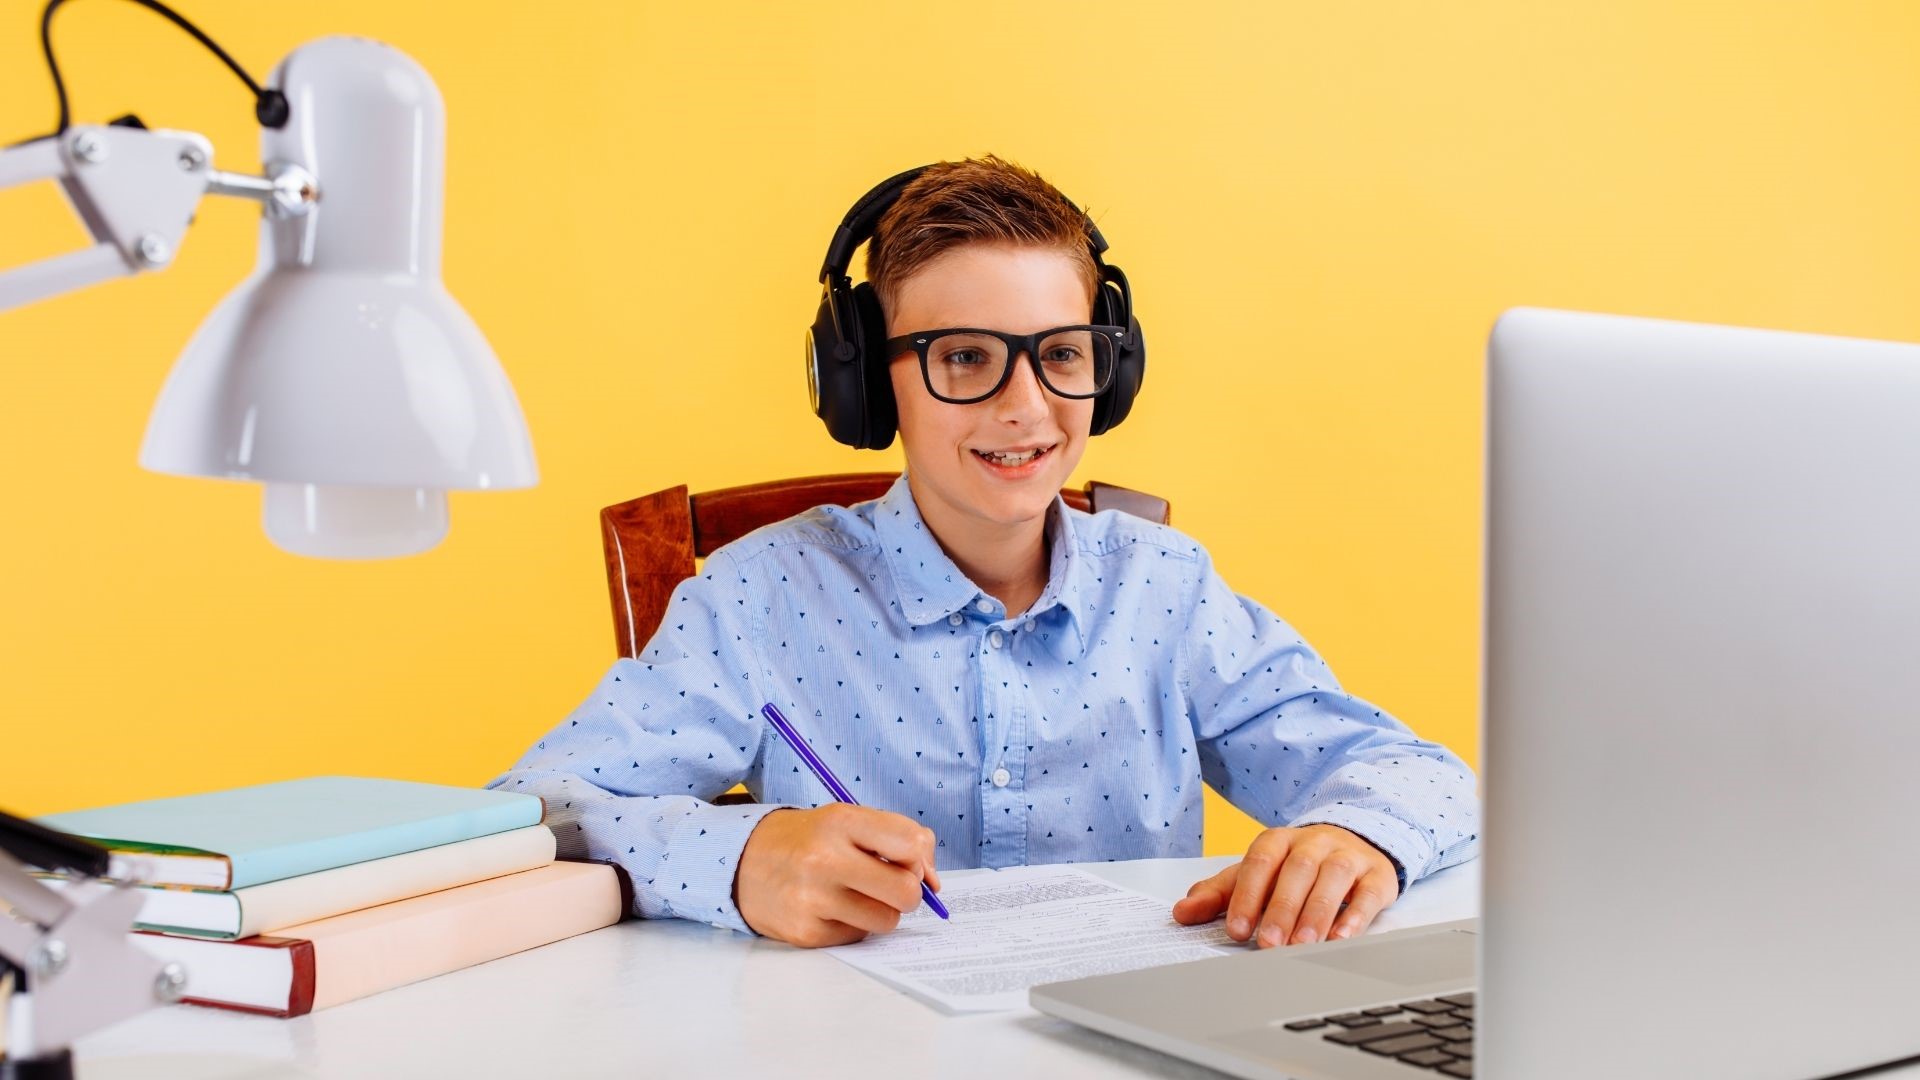 Getting Your Child Ready For Online School